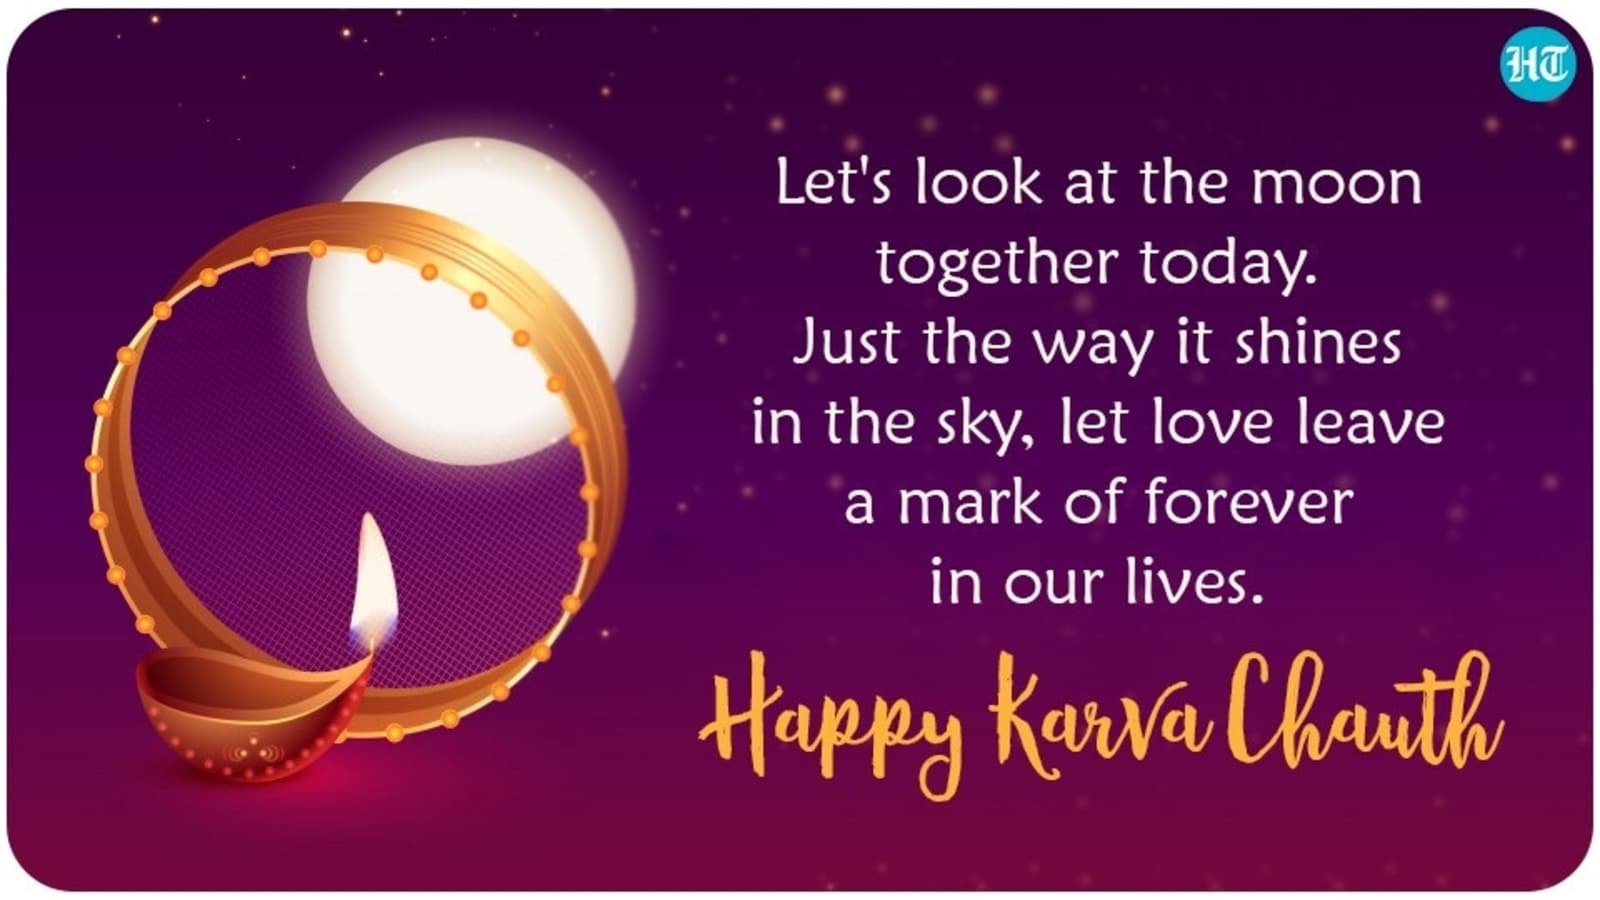 Karva Chauth 2021: Best wishes, images, greetings and messages to share  with loved ones - Hindustan Times